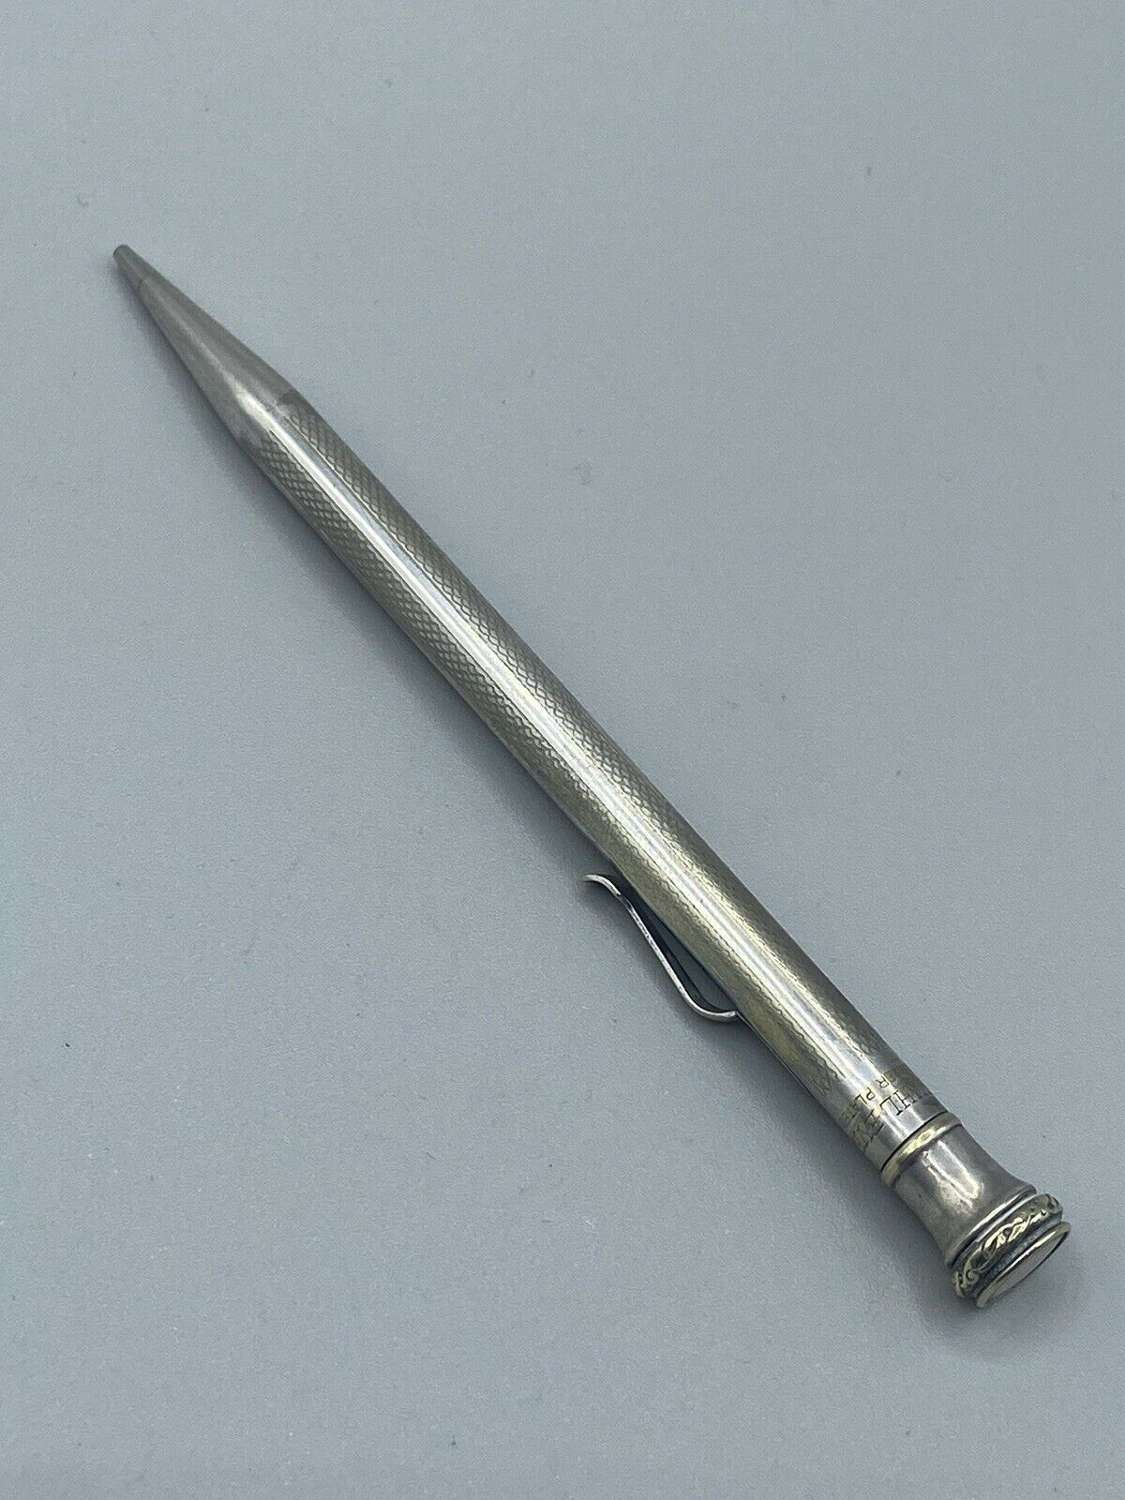 Antique Silver Plate Wahl Eversharp Propelling Pencil Made In The USA